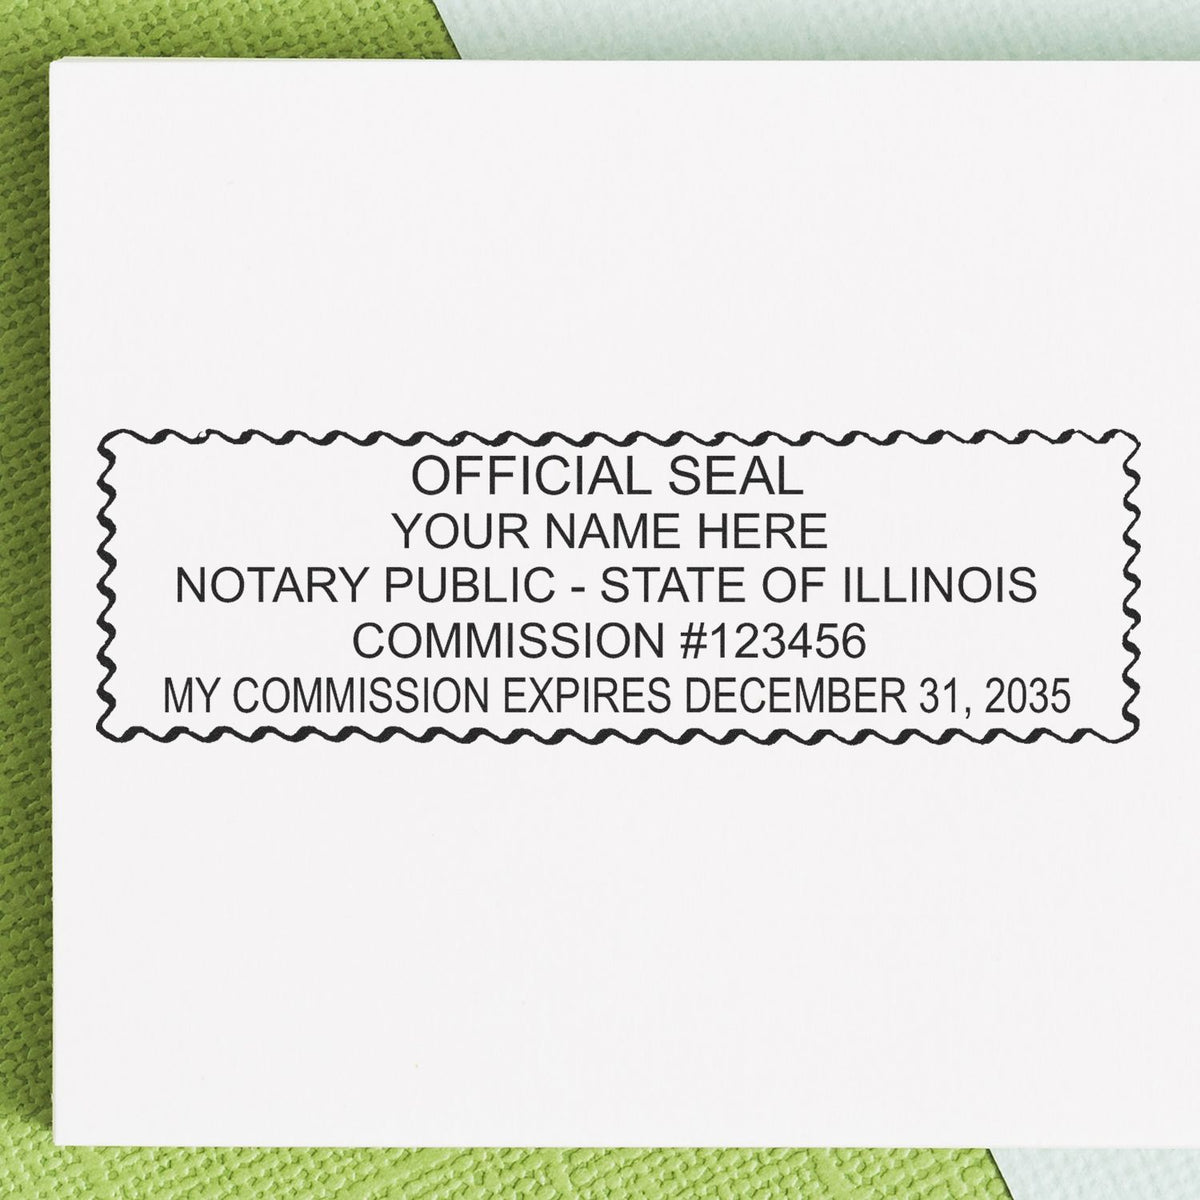 A stamped impression of the Self-Inking Rectangular Illinois Notary Stamp in this stylish lifestyle photo, setting the tone for a unique and personalized product.